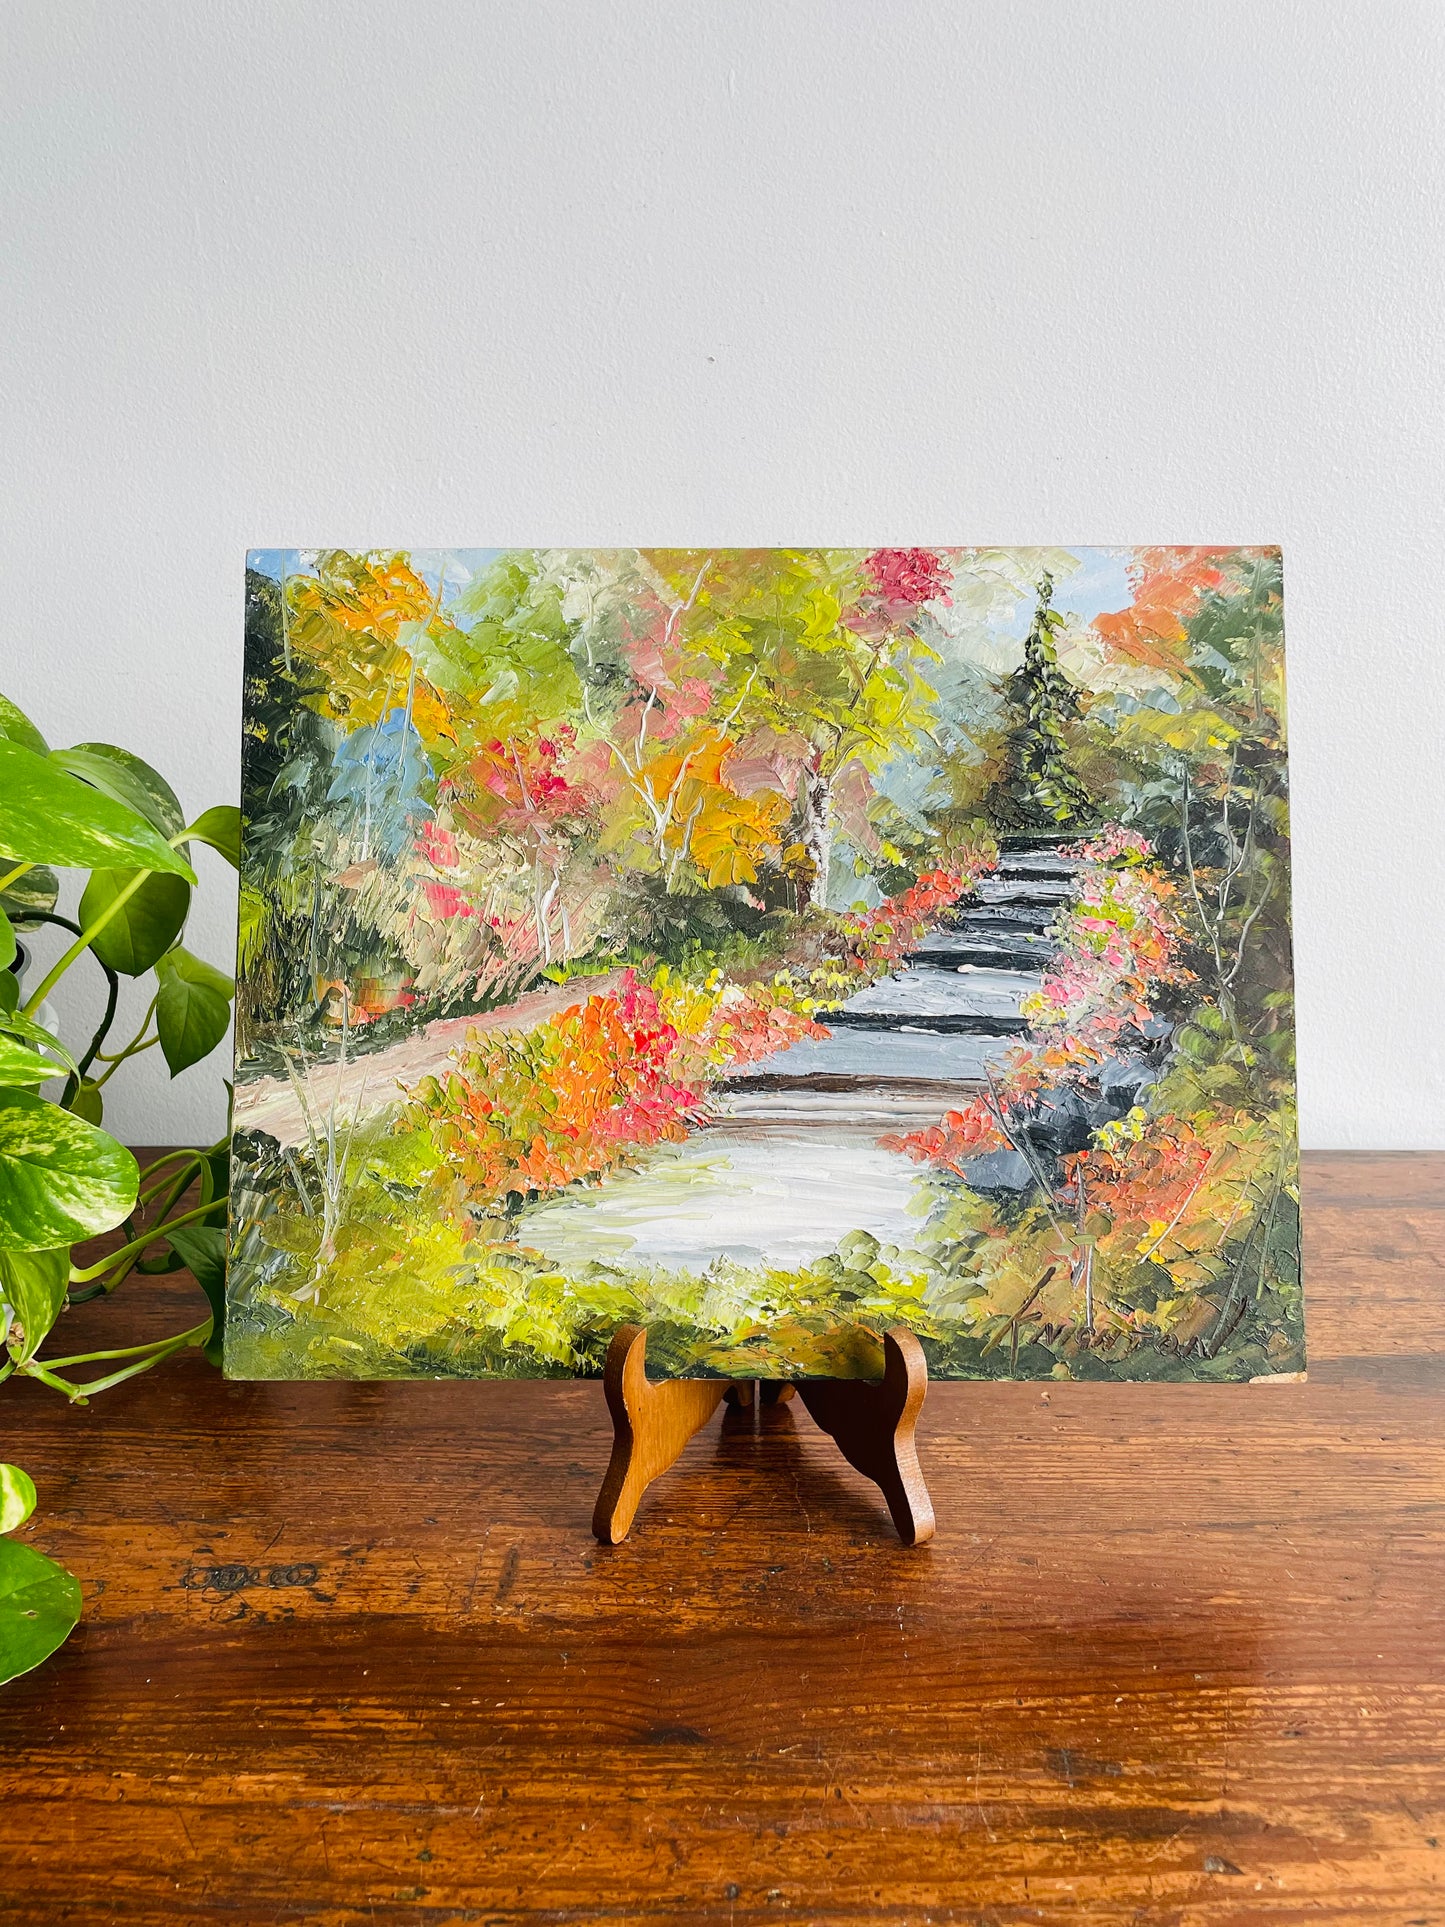 SIGNED Original Art Oil Painting on Masonite Board by Canadian Grimsby Artist James Knighton - Vibrant Flowers Along Garden Path